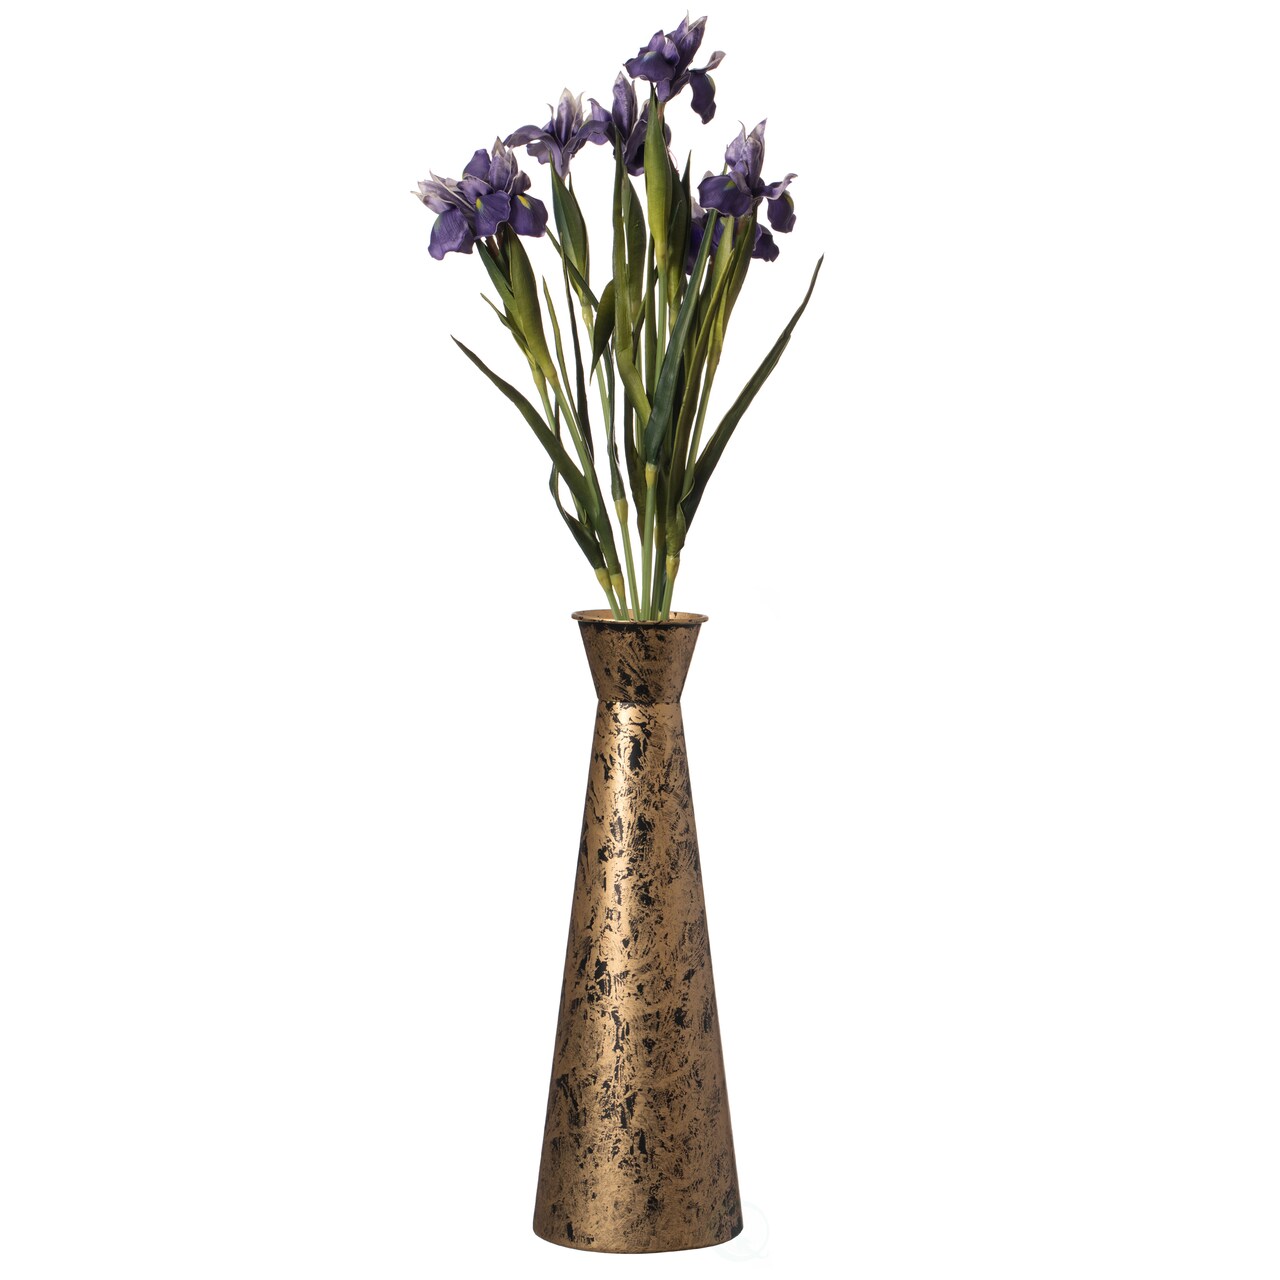 Brushed Paint Unique Straight Vase, Design Metal Decorative Floor Vase, Flower Holder for Entryway, Living Room, or Dining Room-Perfect for Displaying Flowers or Plants